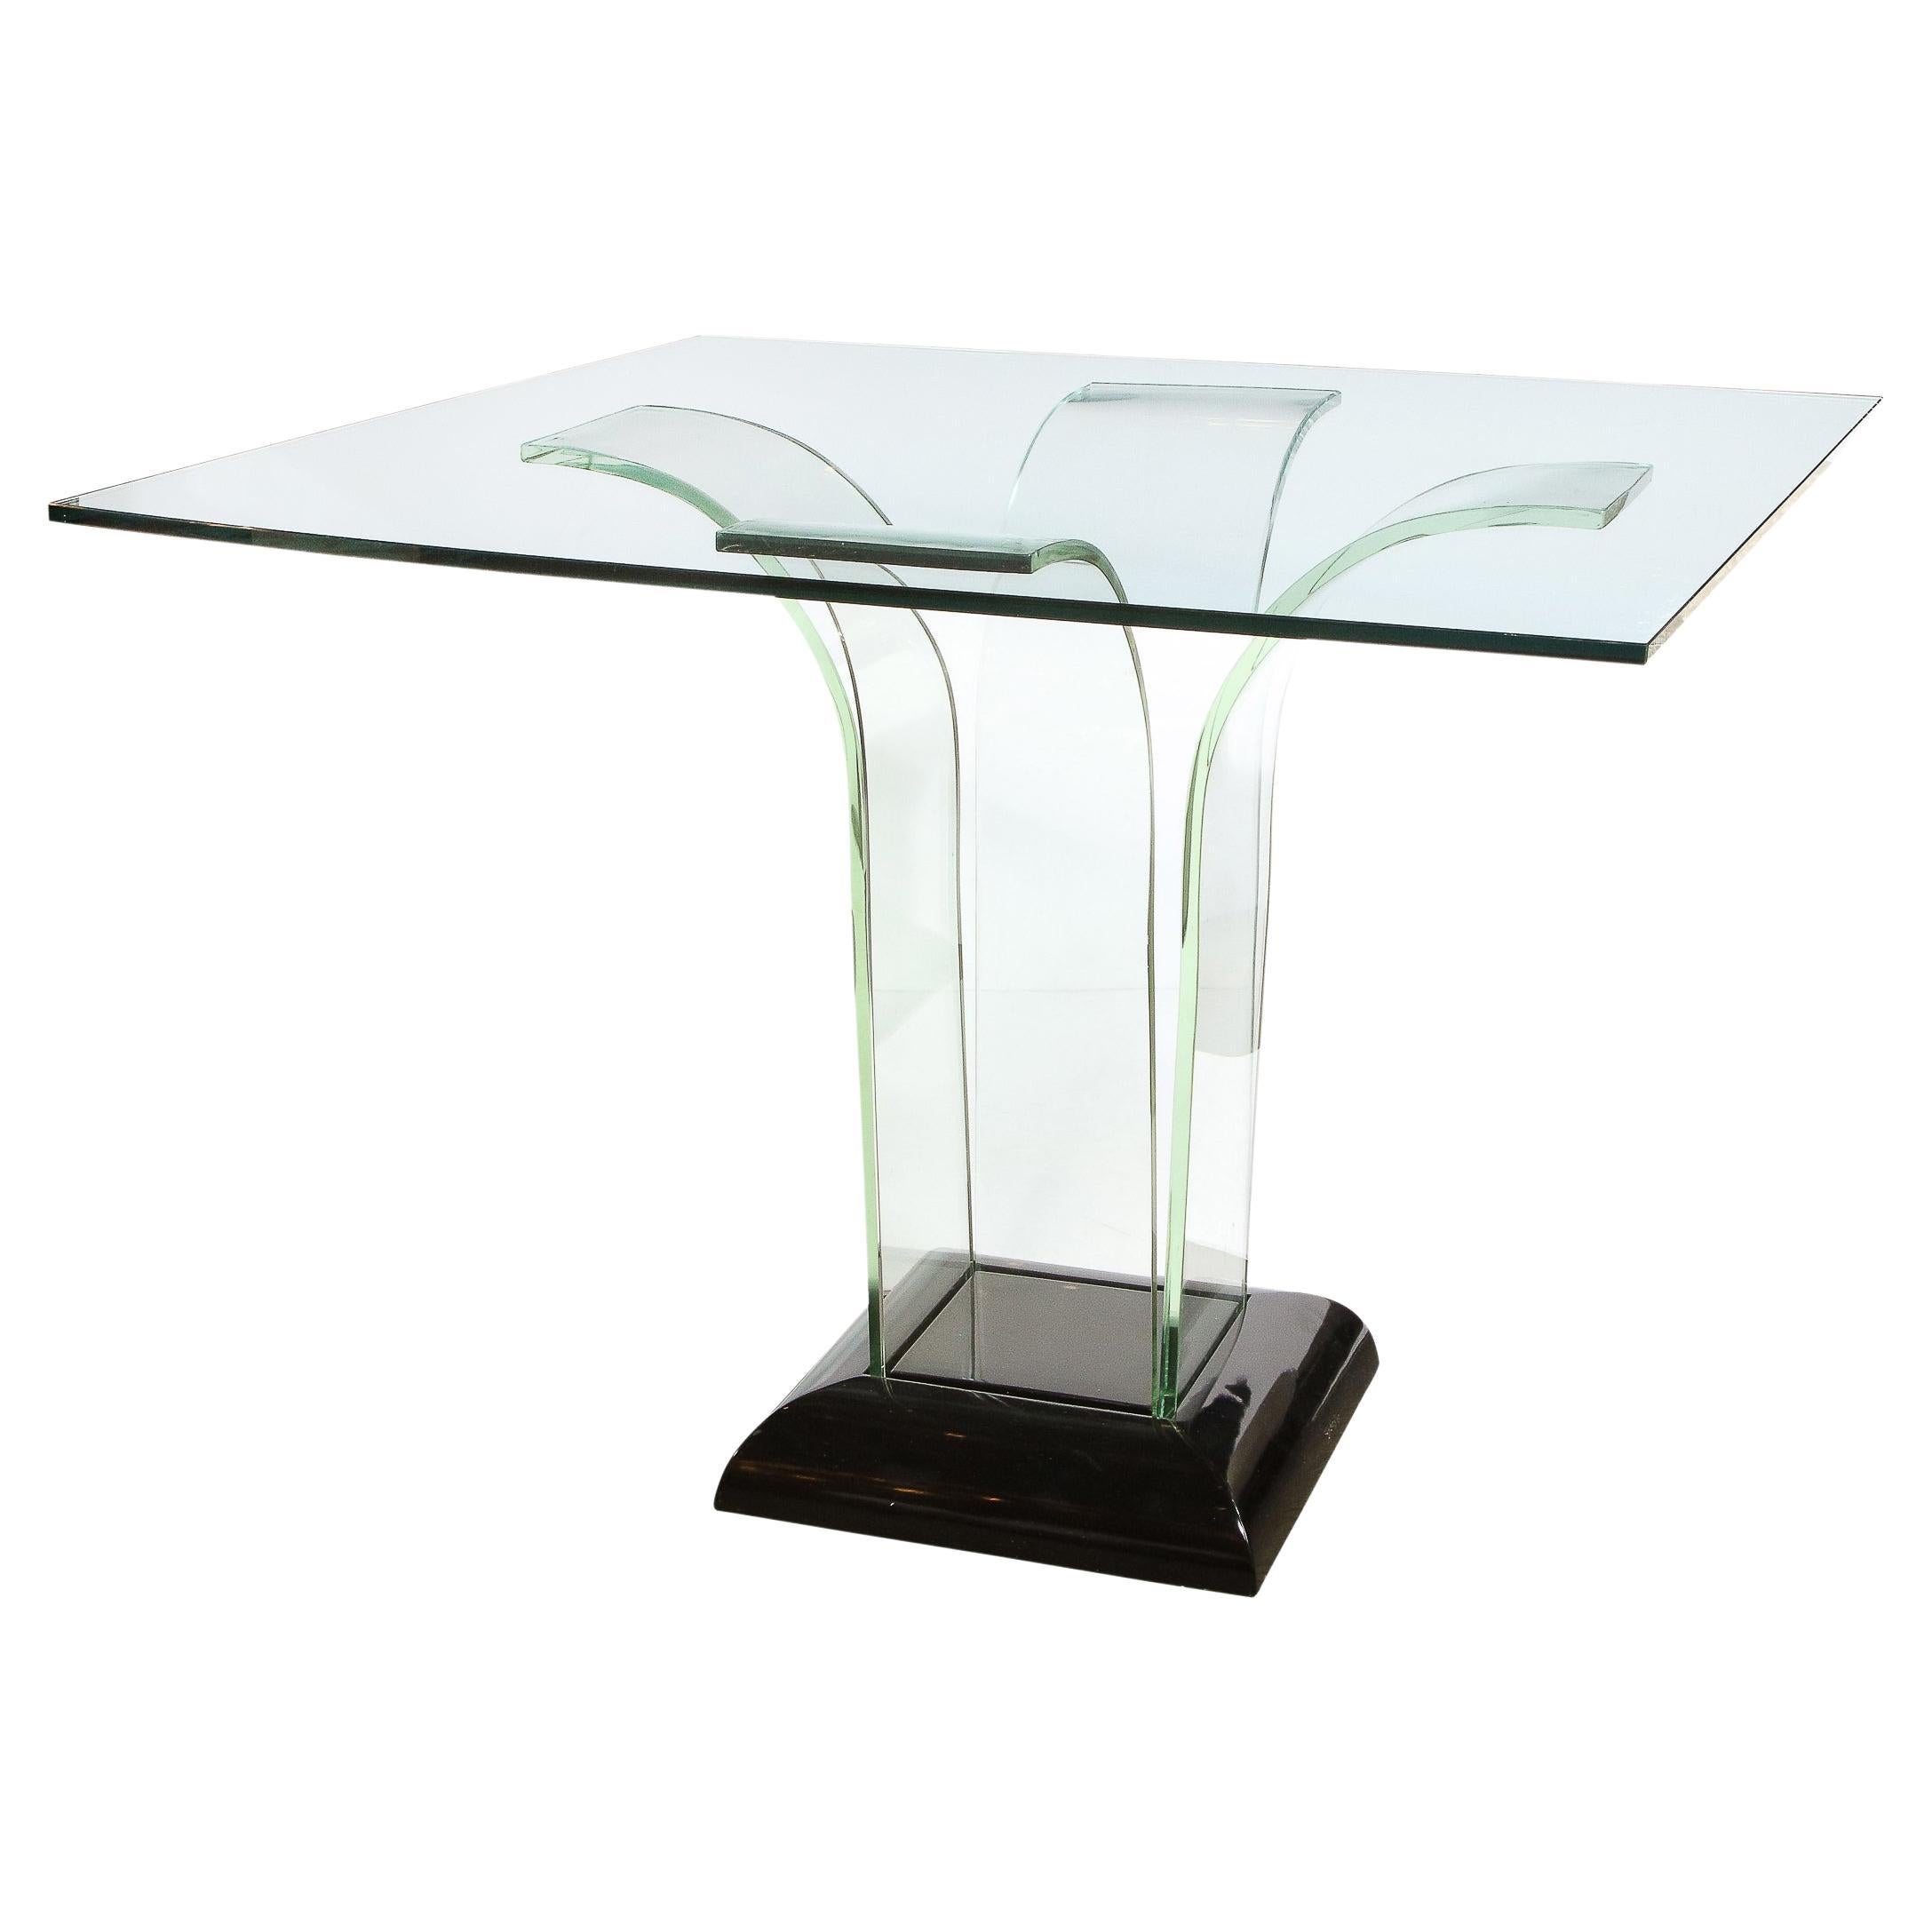 This stunning Art Deco Machine Age game/ dining table was realized in the United States circa 1935 It features a beveled lustrous black lacquer base that supports four streamlined translucent streamlined glass forms that ascend upwards and fan out